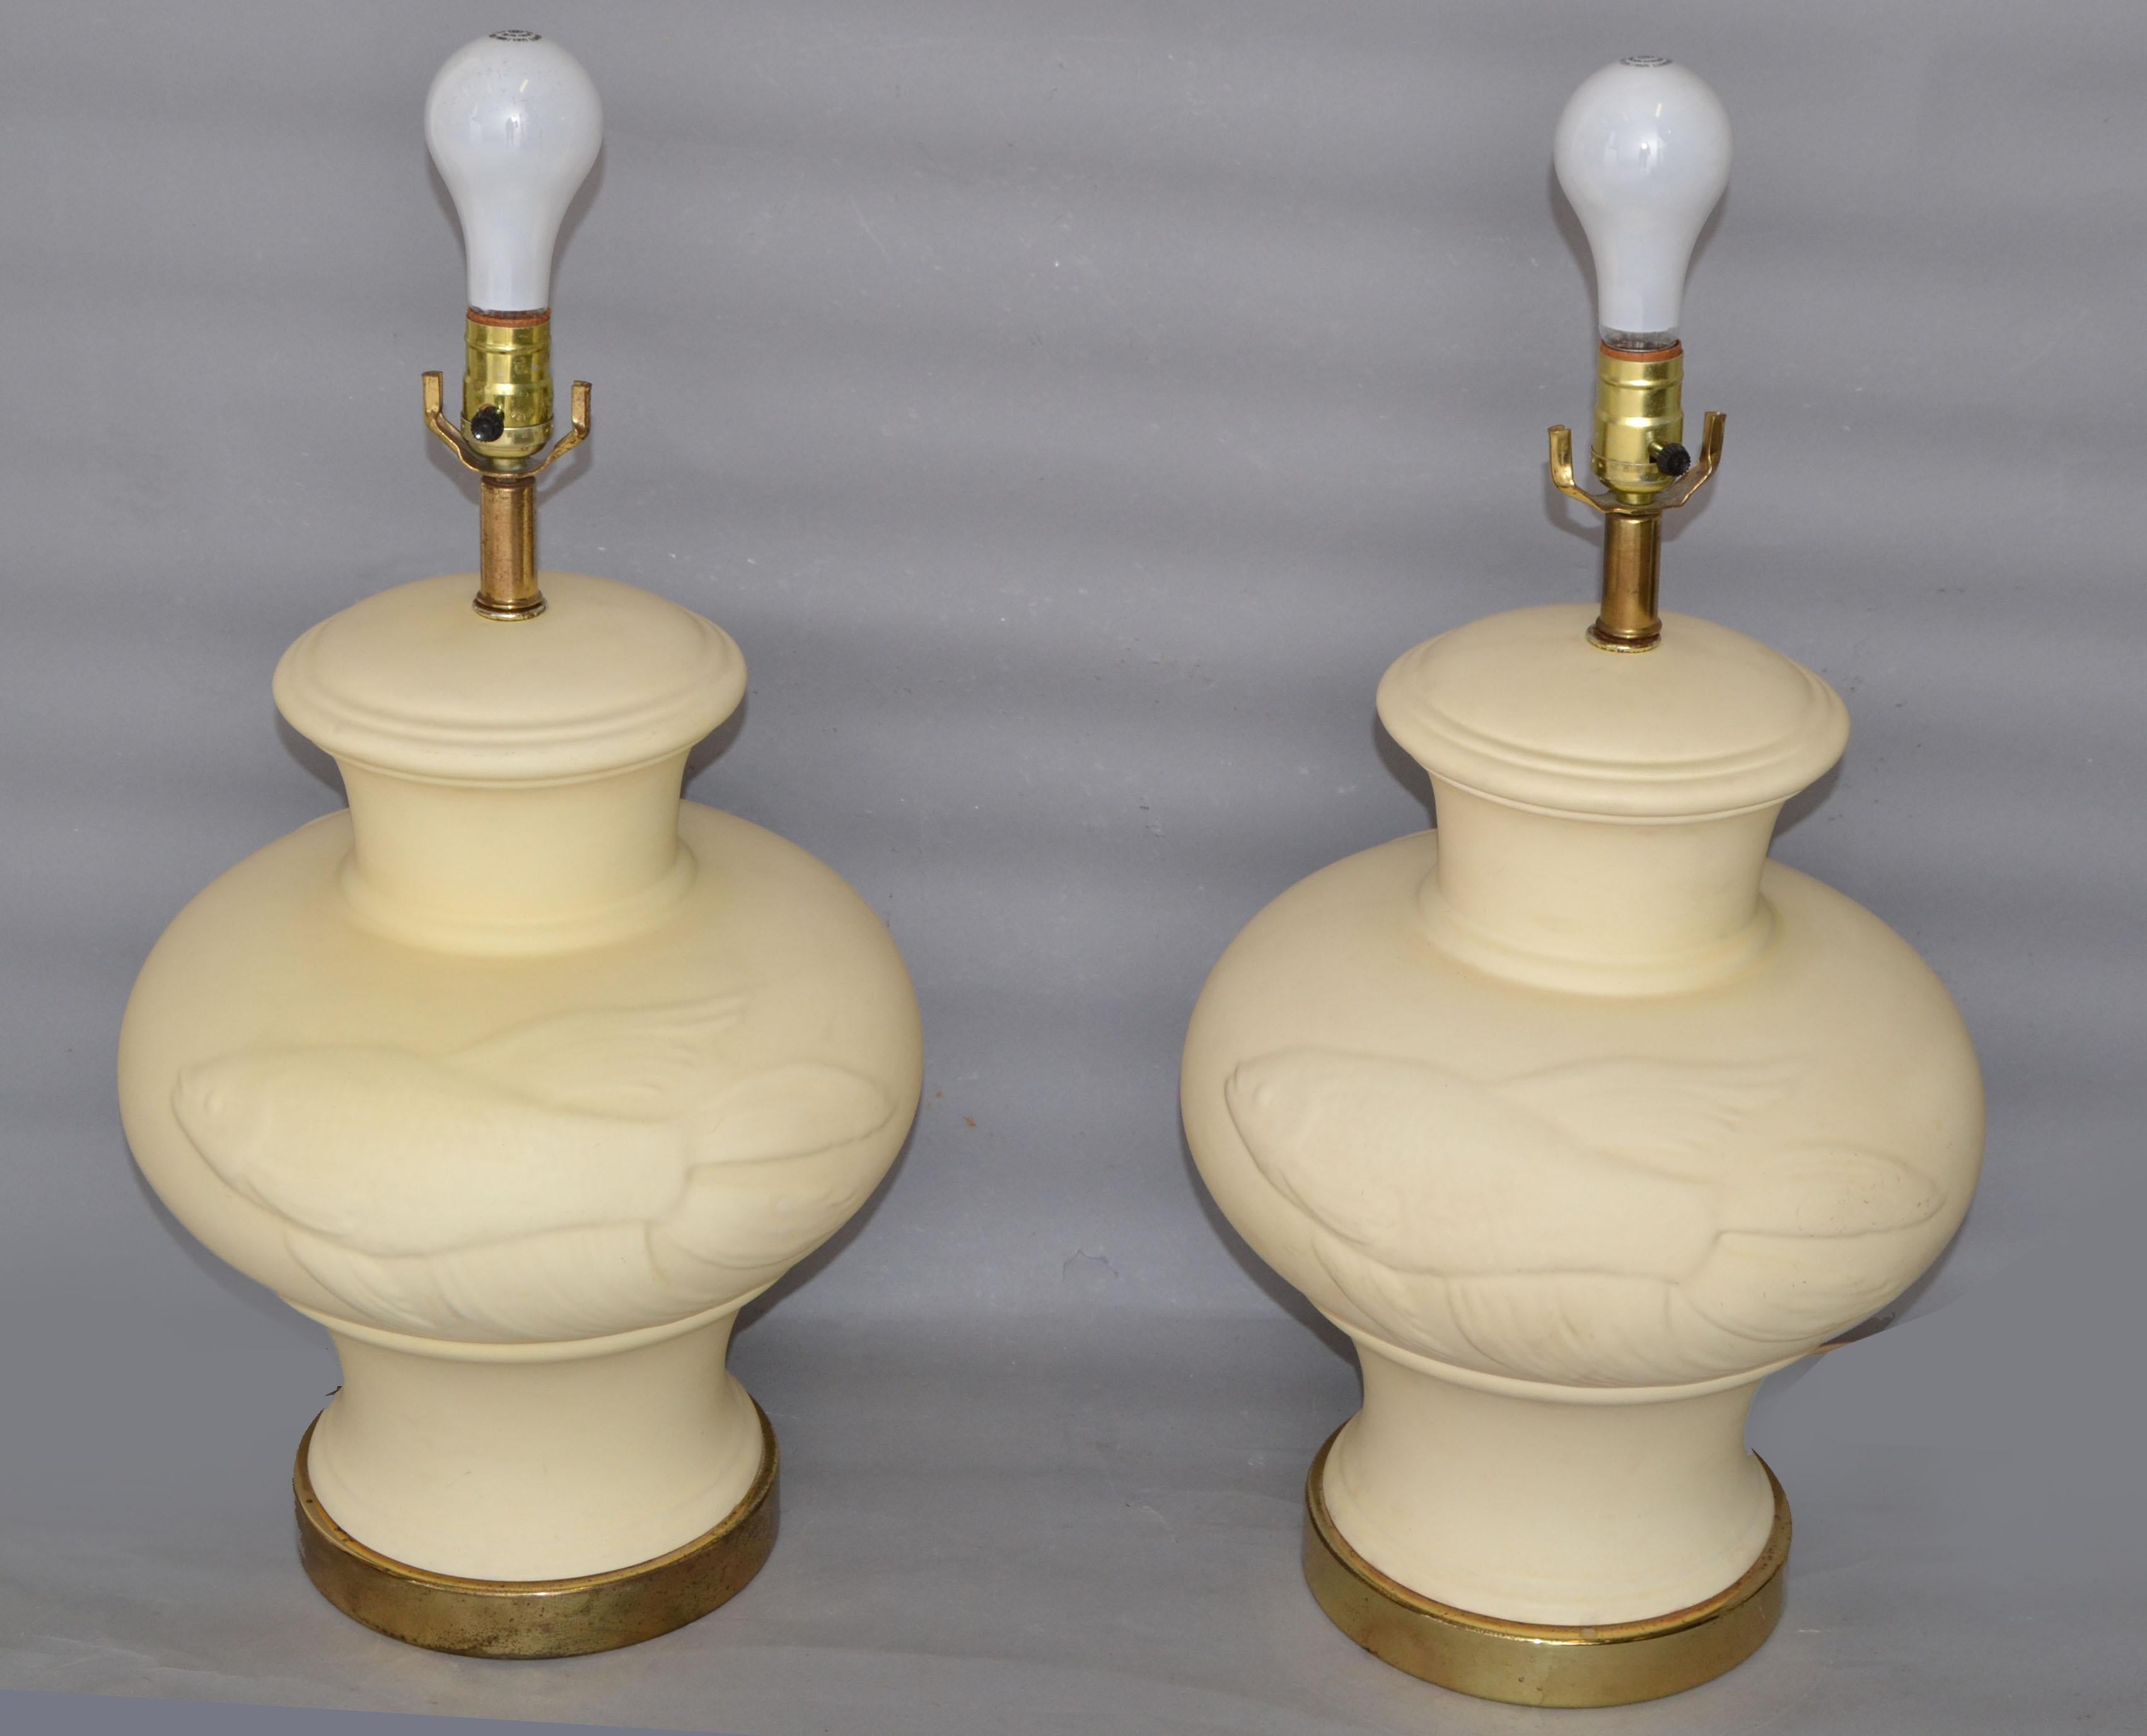 1970 Chinese Inspired Beige Ceramic & Brass Table Lamps with Koi Fish Image Pair For Sale 4